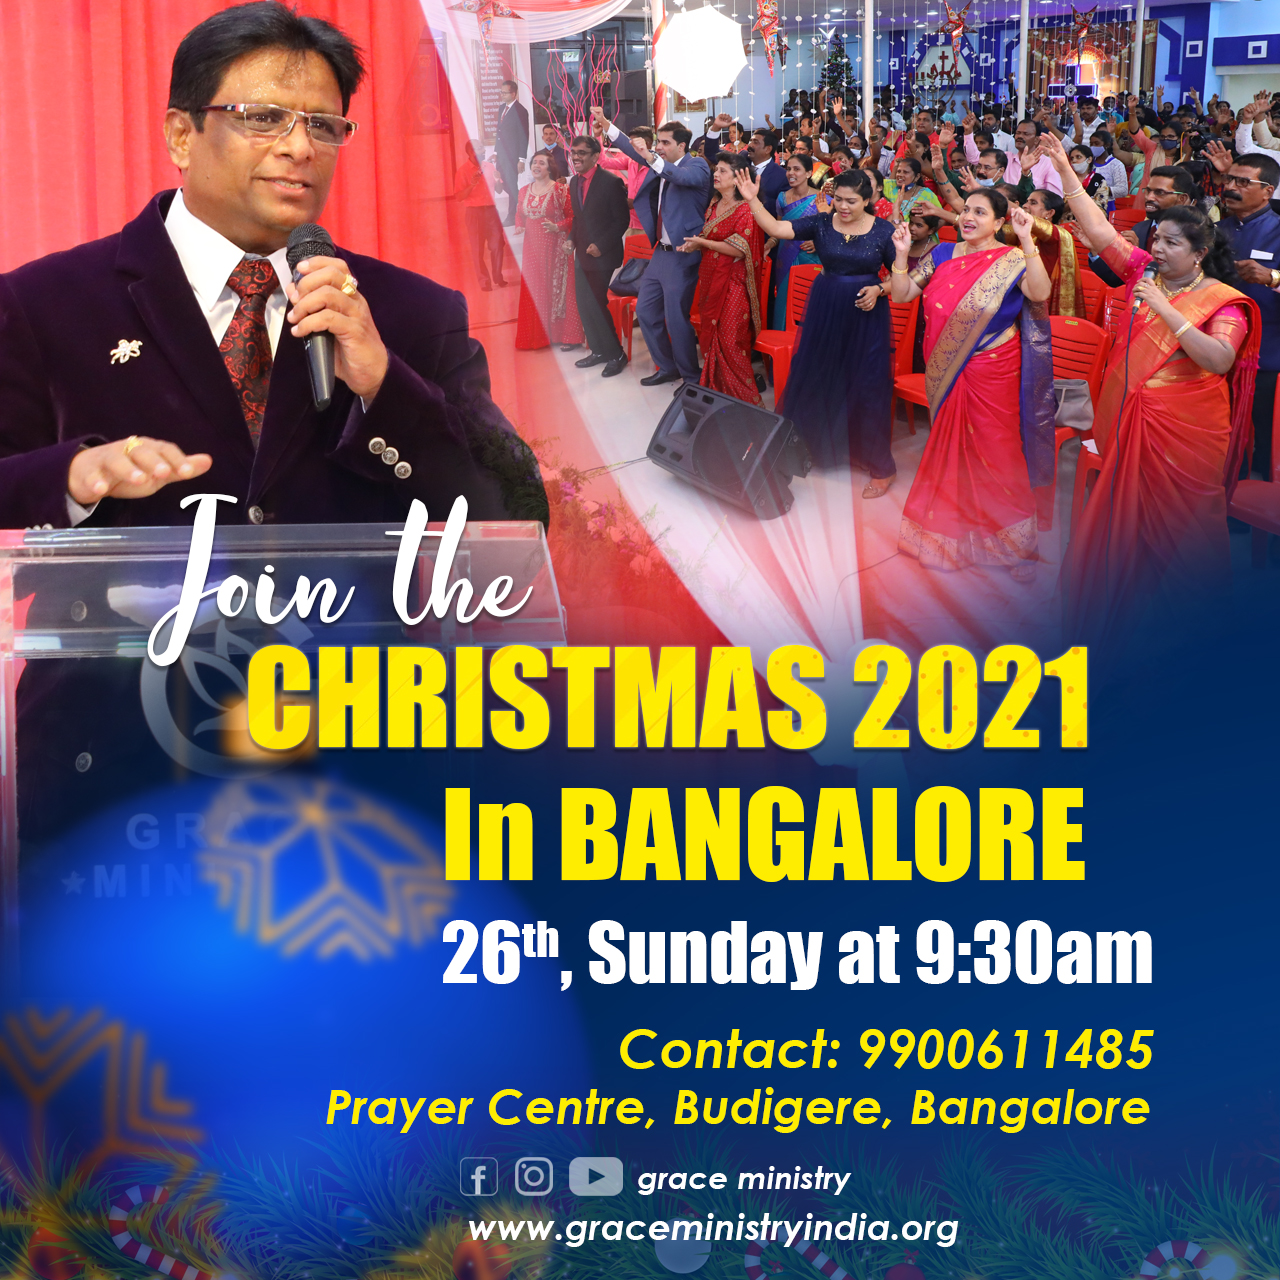 Join the Grace Ministry Christmas Program 2021 by Grace Ministry held in Bangalore on 26th December in Prayer Centre at Budigere. Come with family and be blessed. 